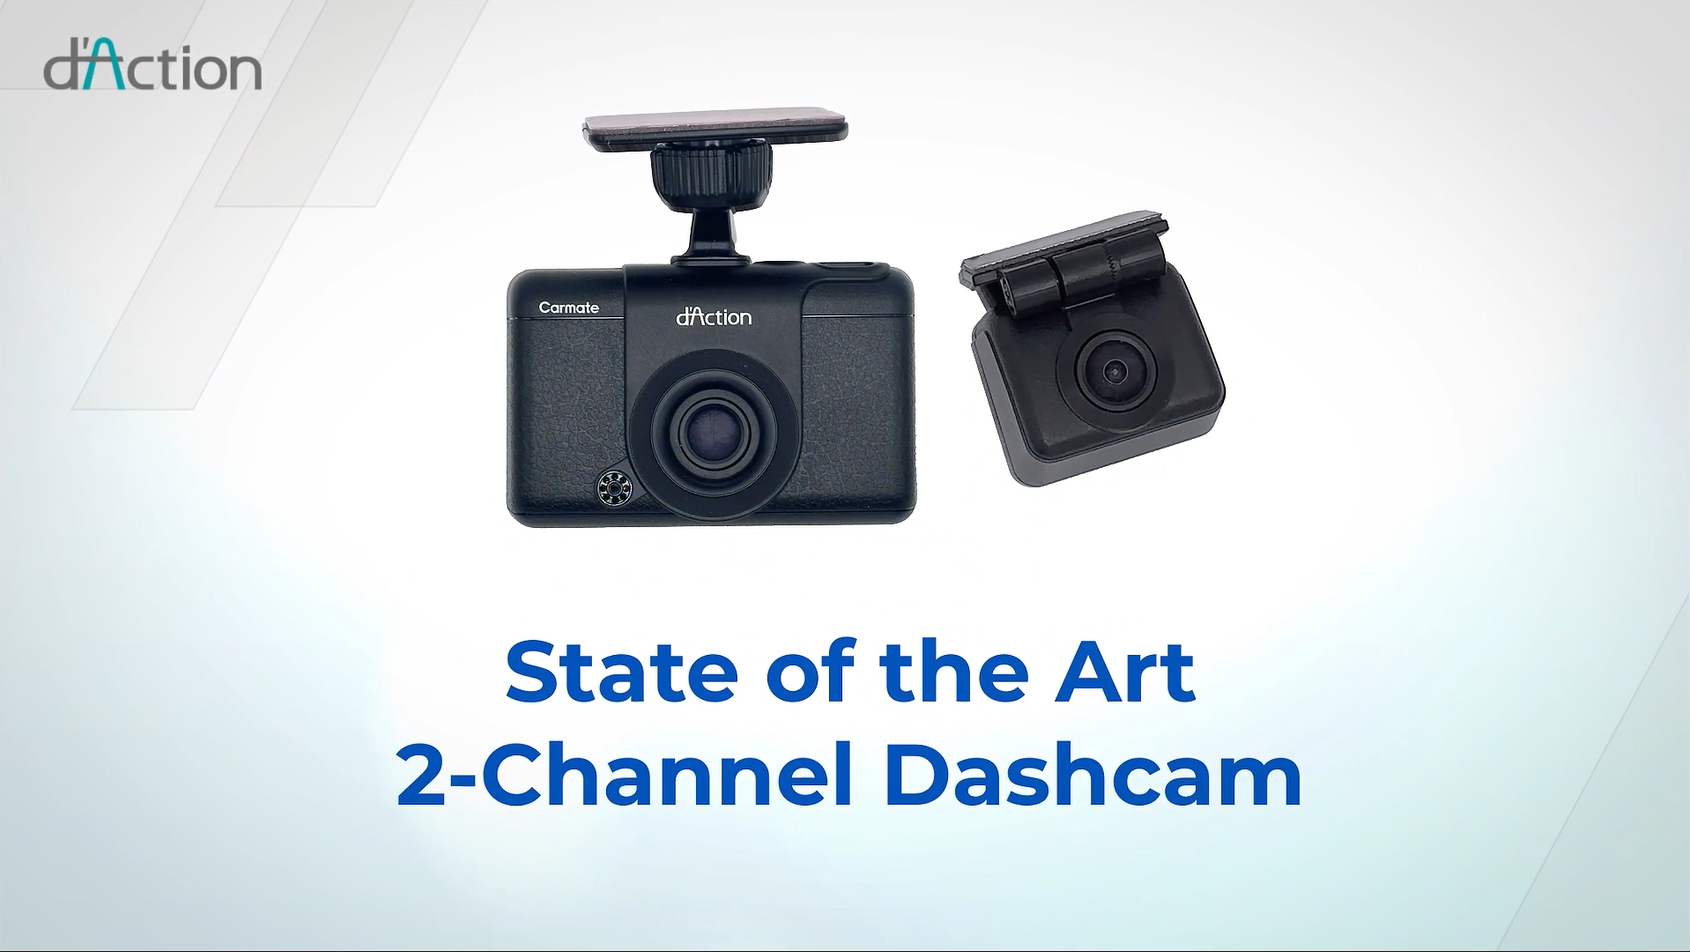 Introducing our new 2-channel dash cam DC2000RA